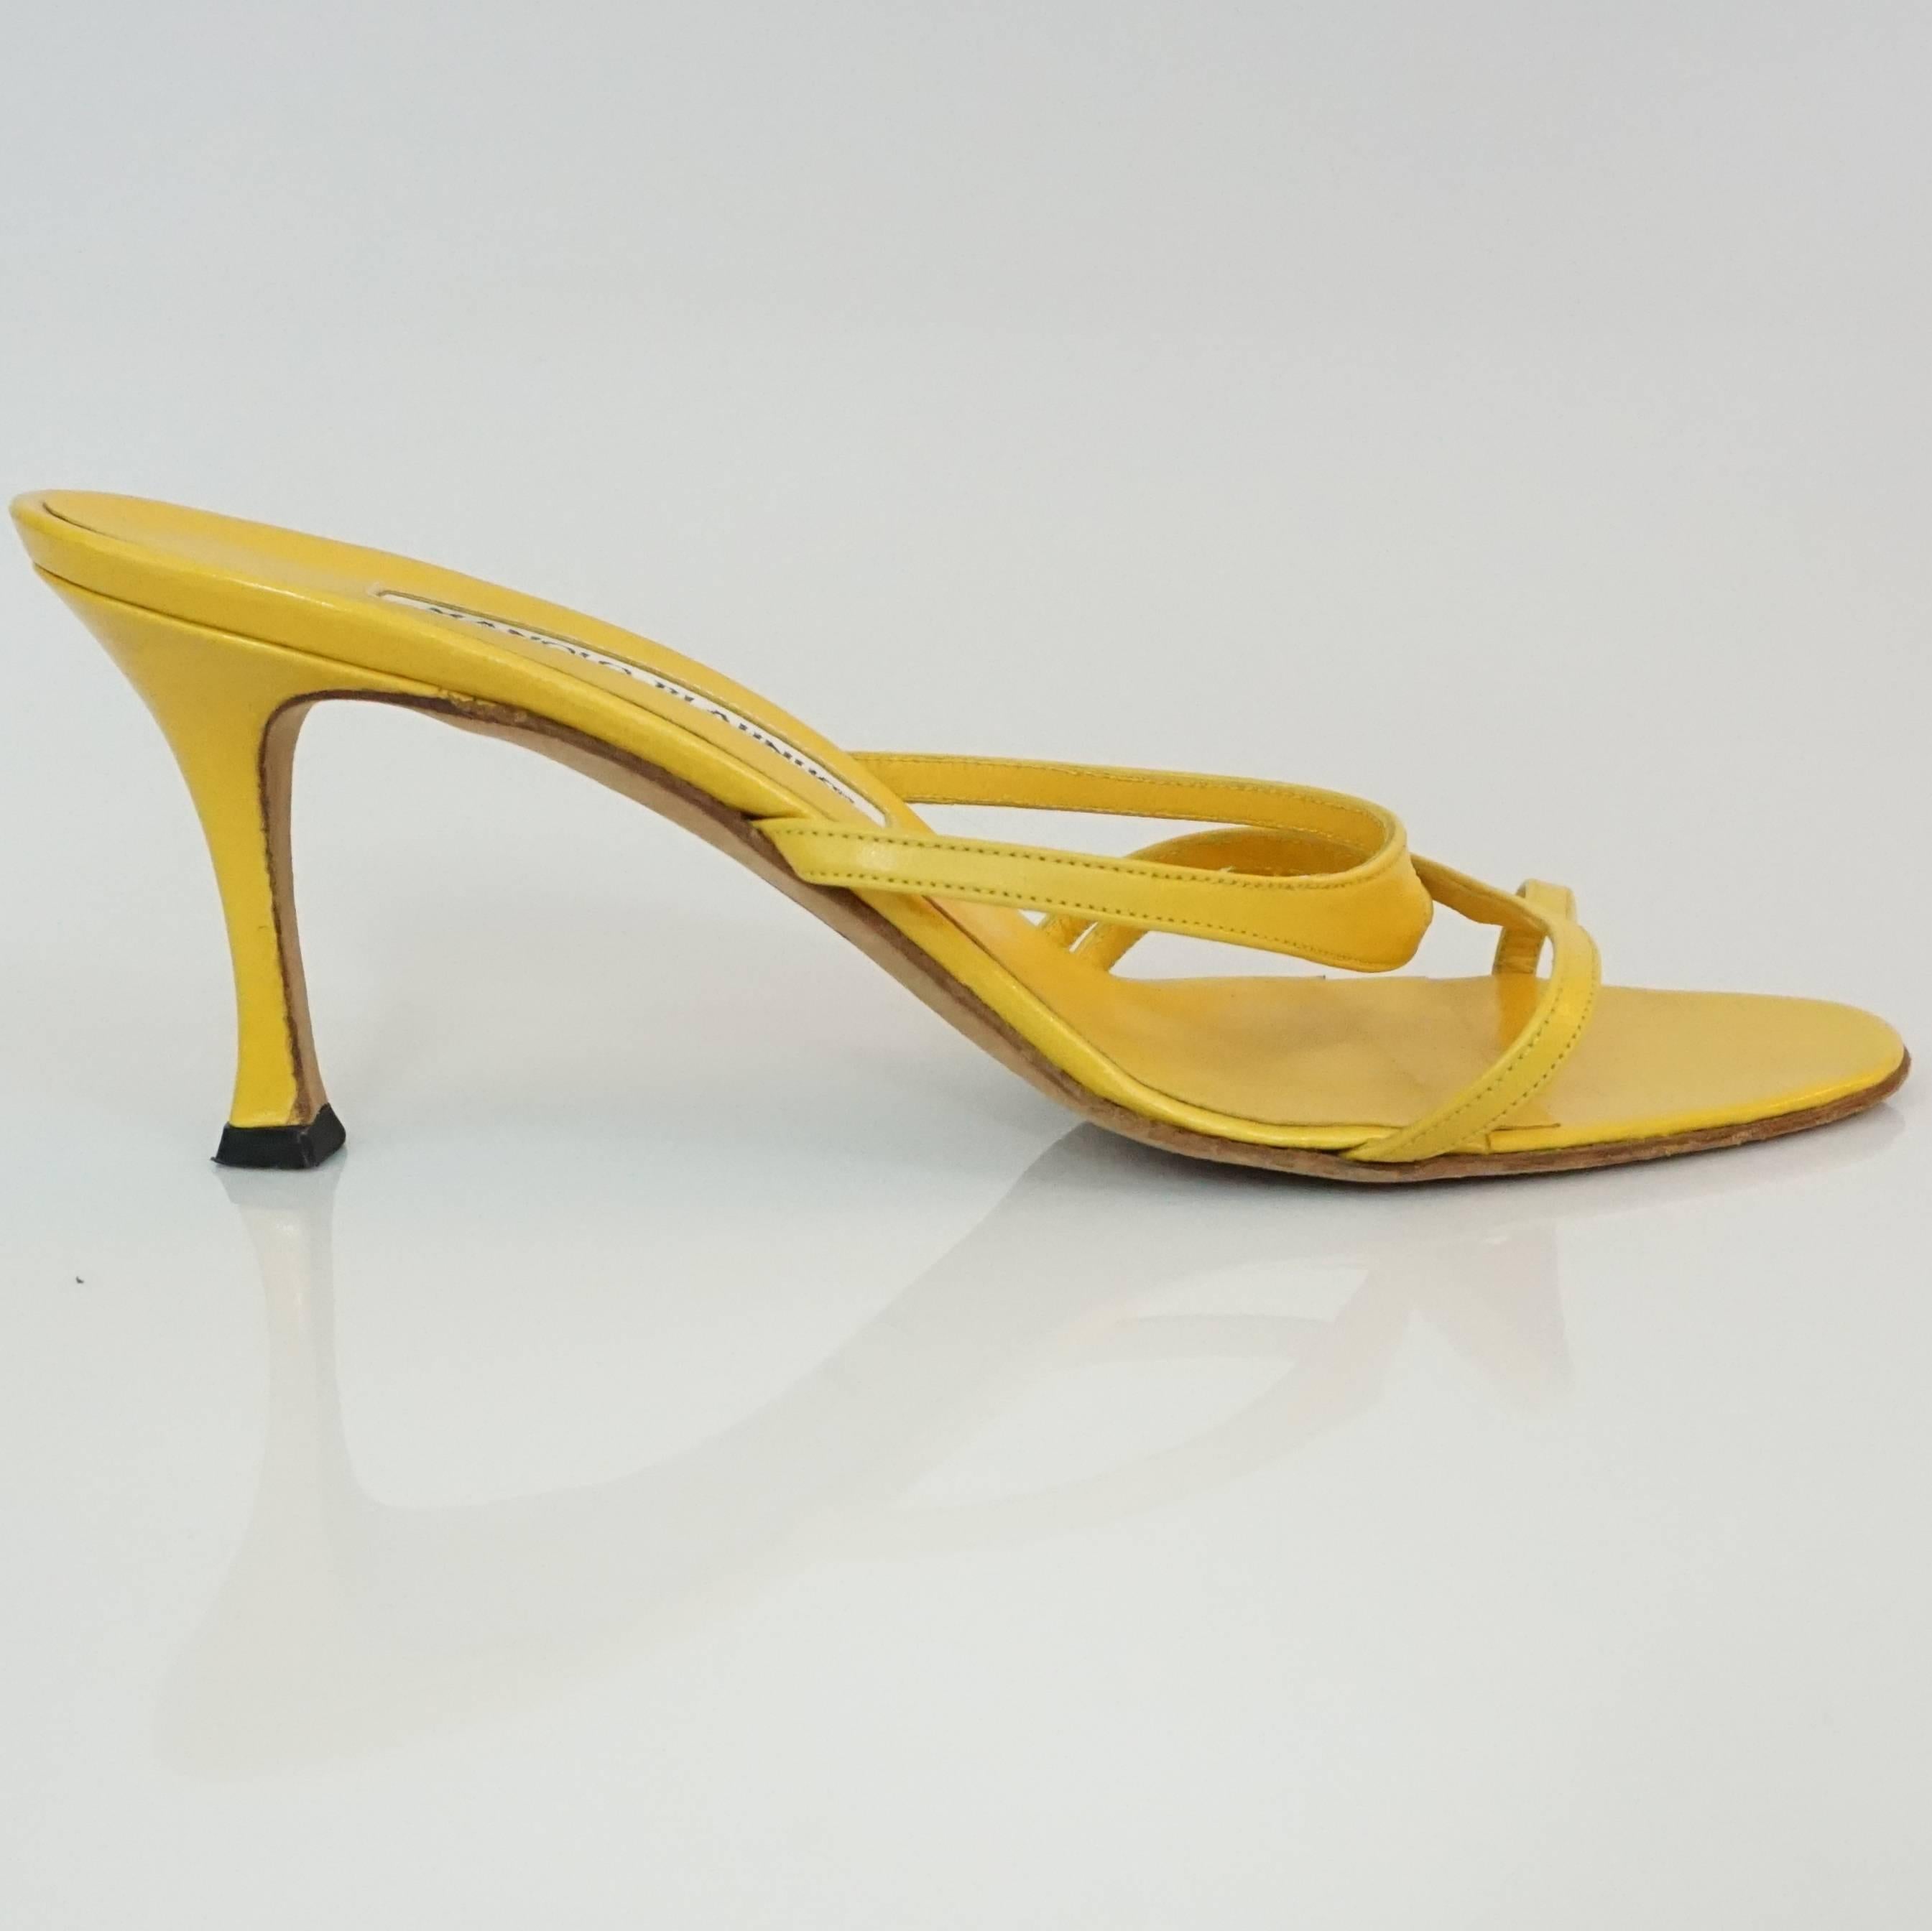 Manolo Blahnik Yellow Leather strappy sandal - 37  This beautiful sandal is the perfect pop of color for any outfit, and great for the summer. The shoe is in excellent condition. 

Heel Height 2.75